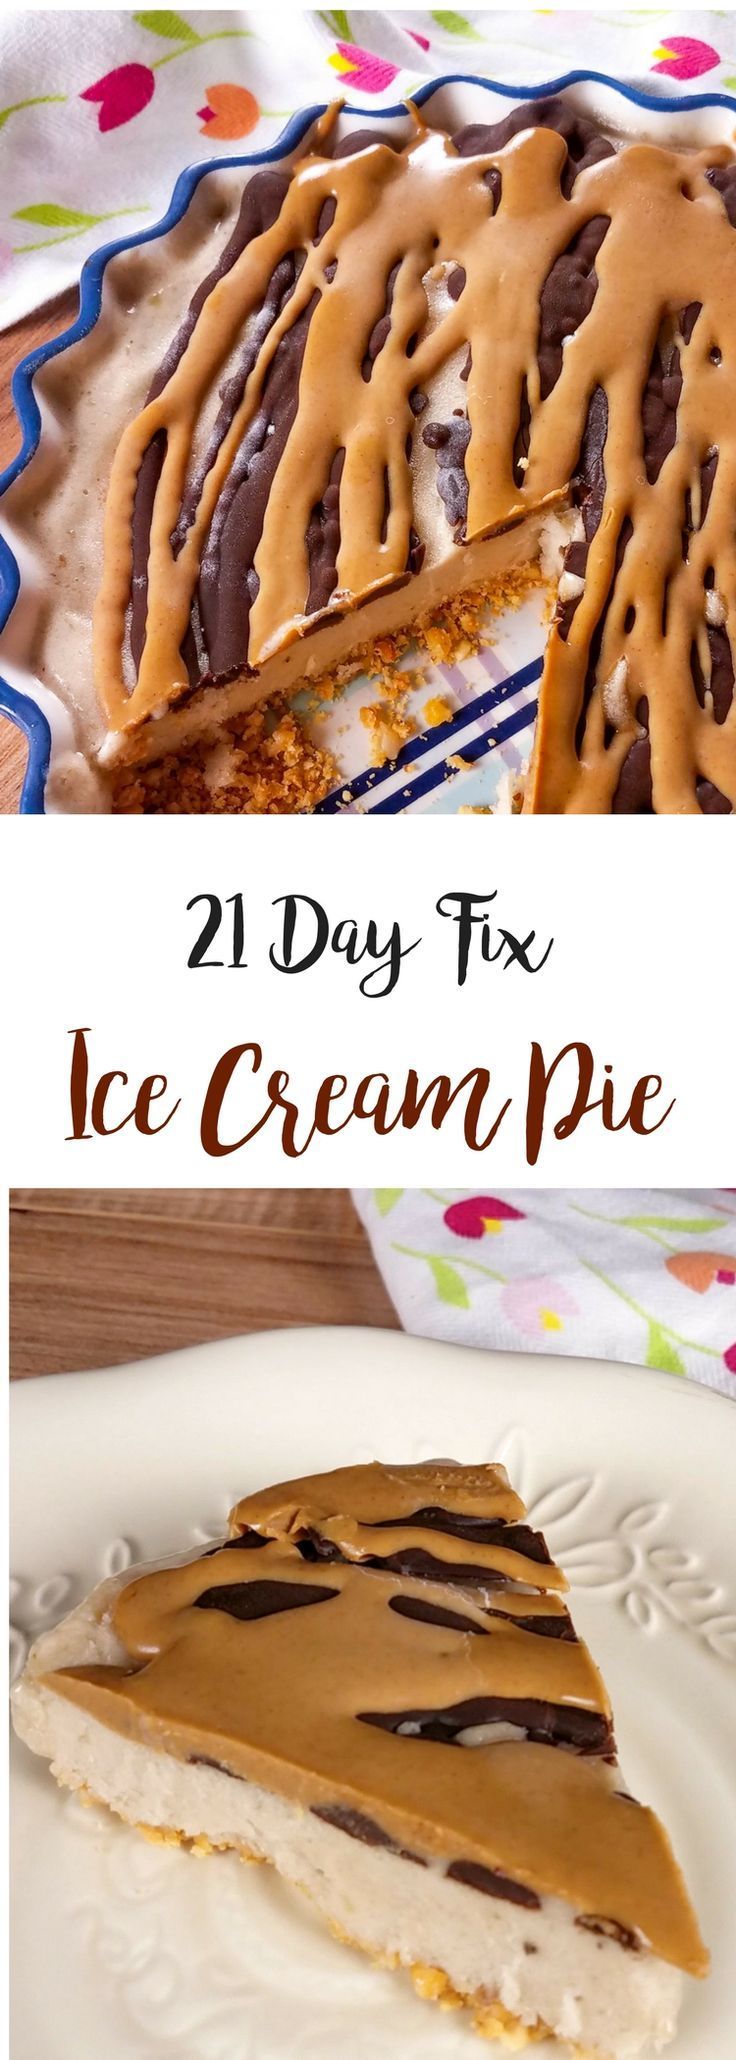 This 21 Day Fix Ice Cream Pie is seriously SO good…and with the peanut “crust” and homemade magic shell topping, it tastes like